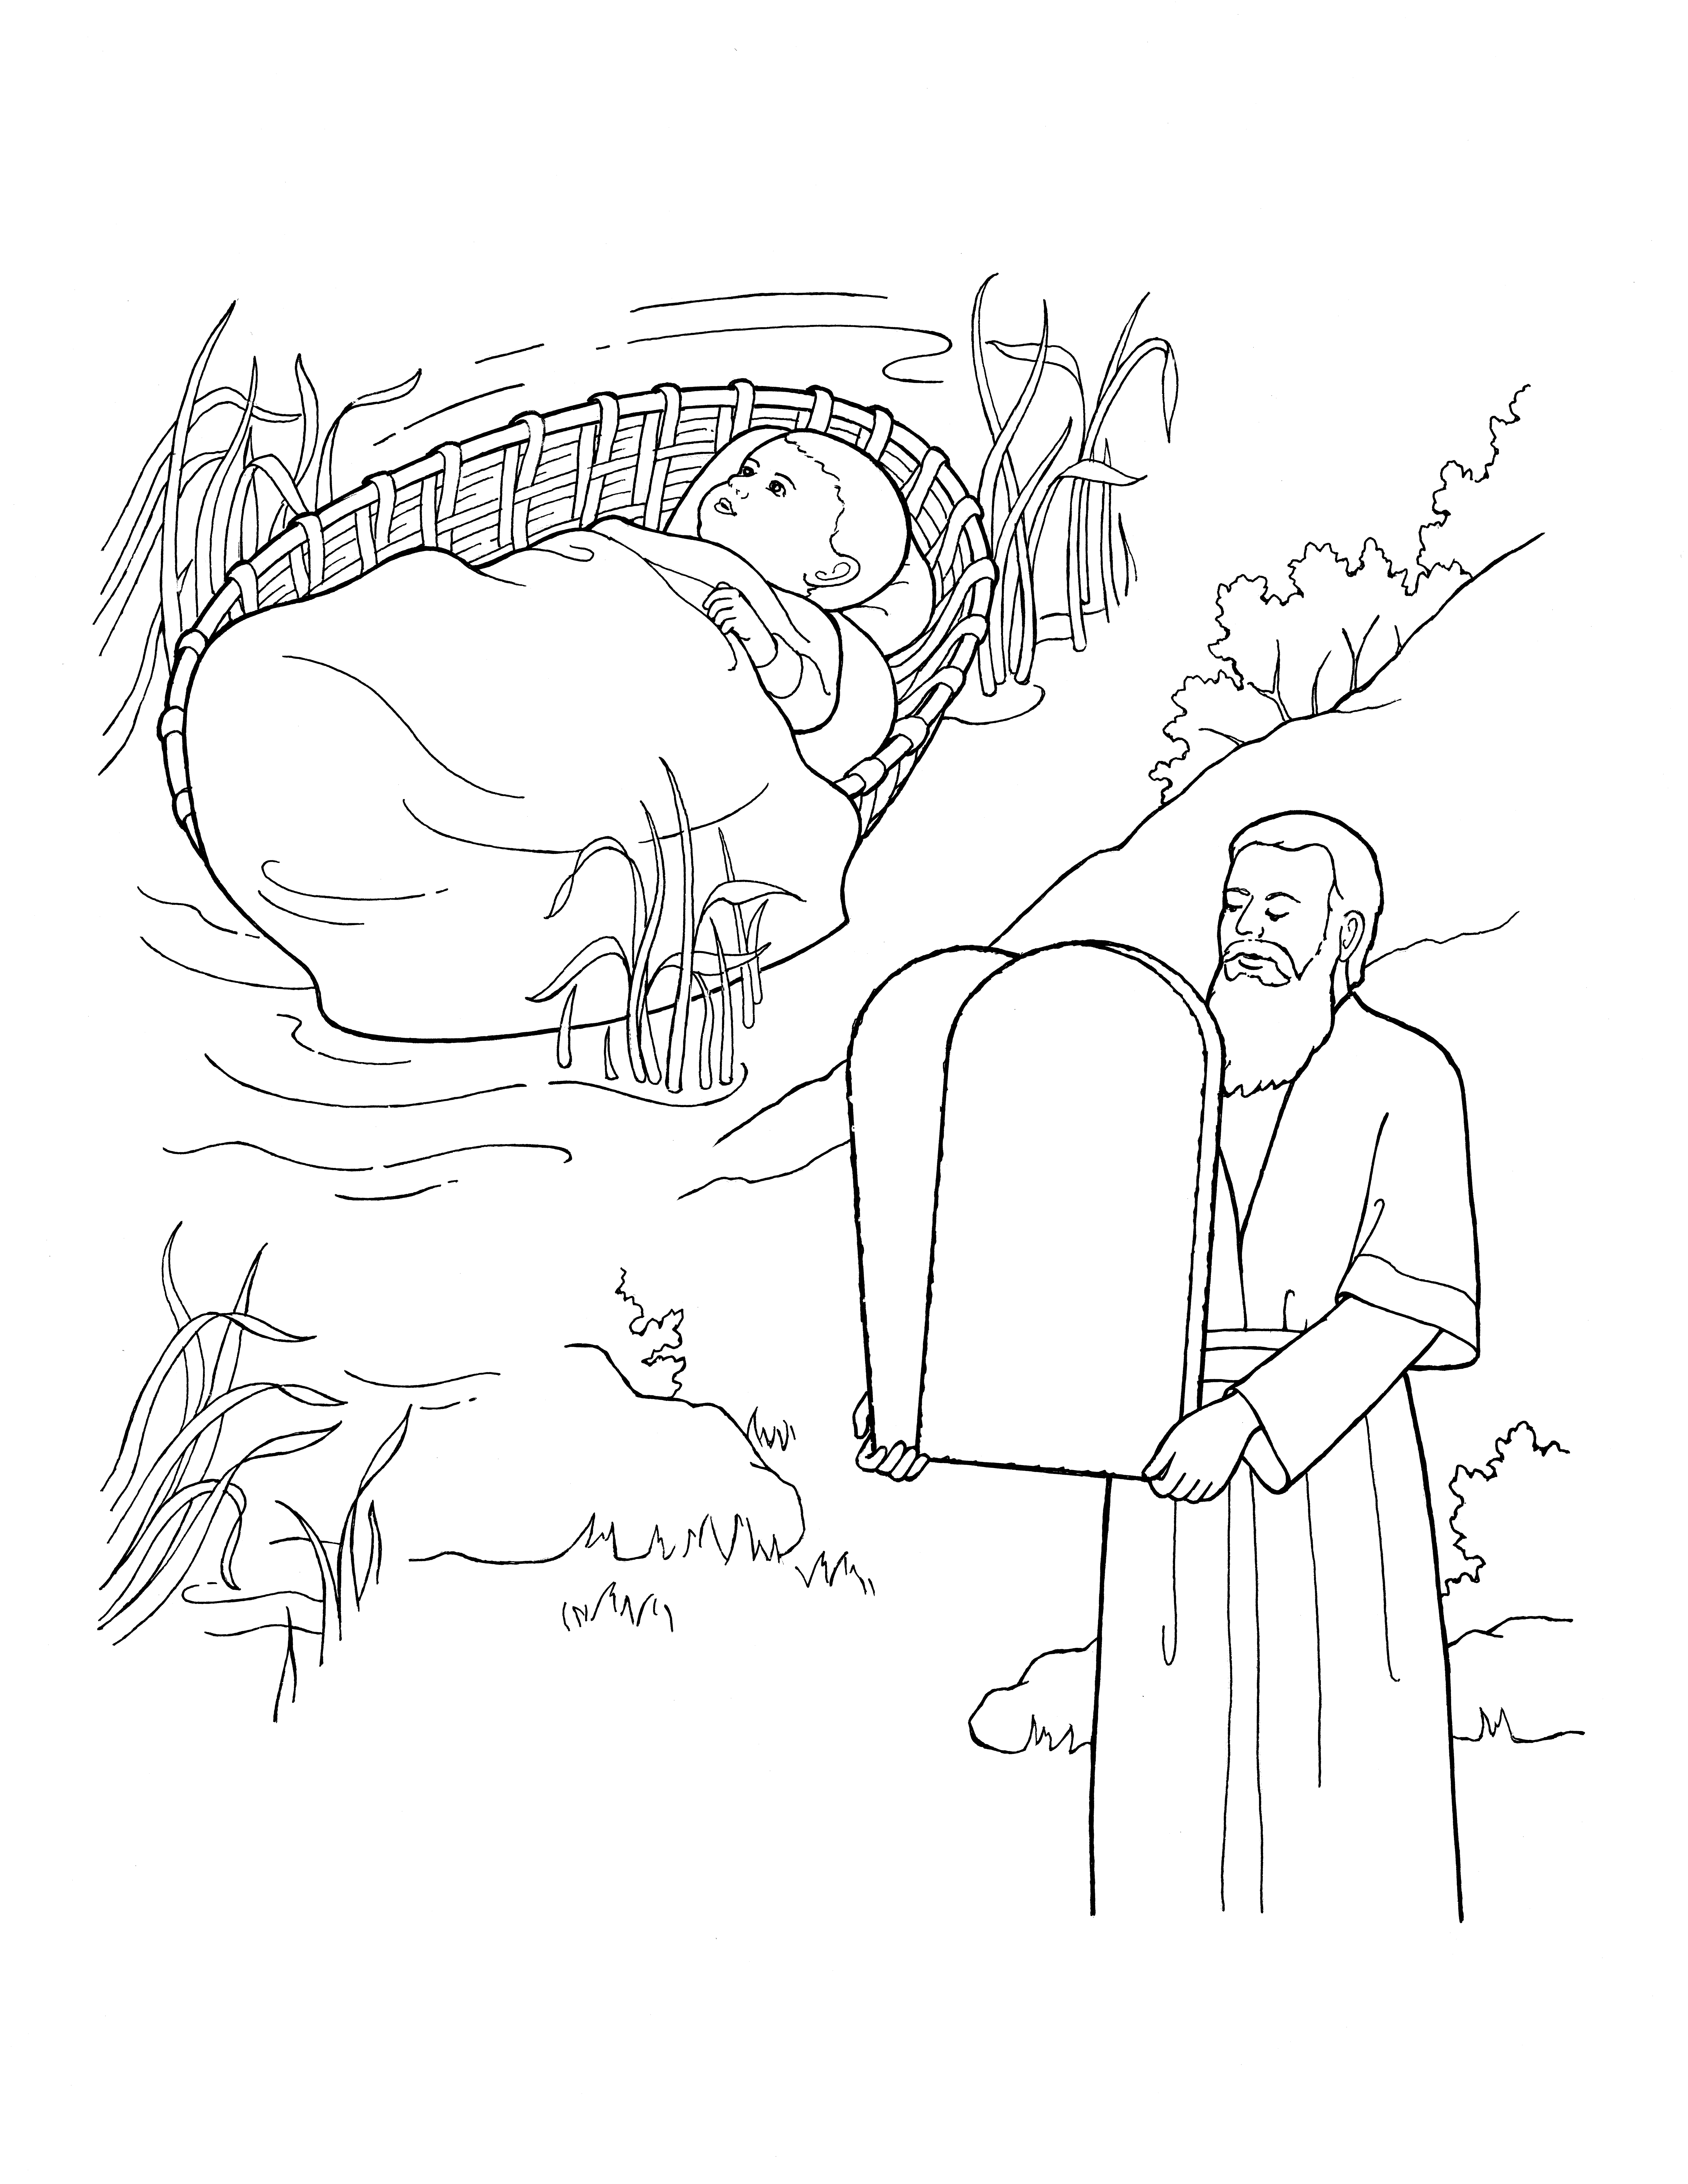 An illustration of Moses as a baby and then as a man holding the Ten Commandments.